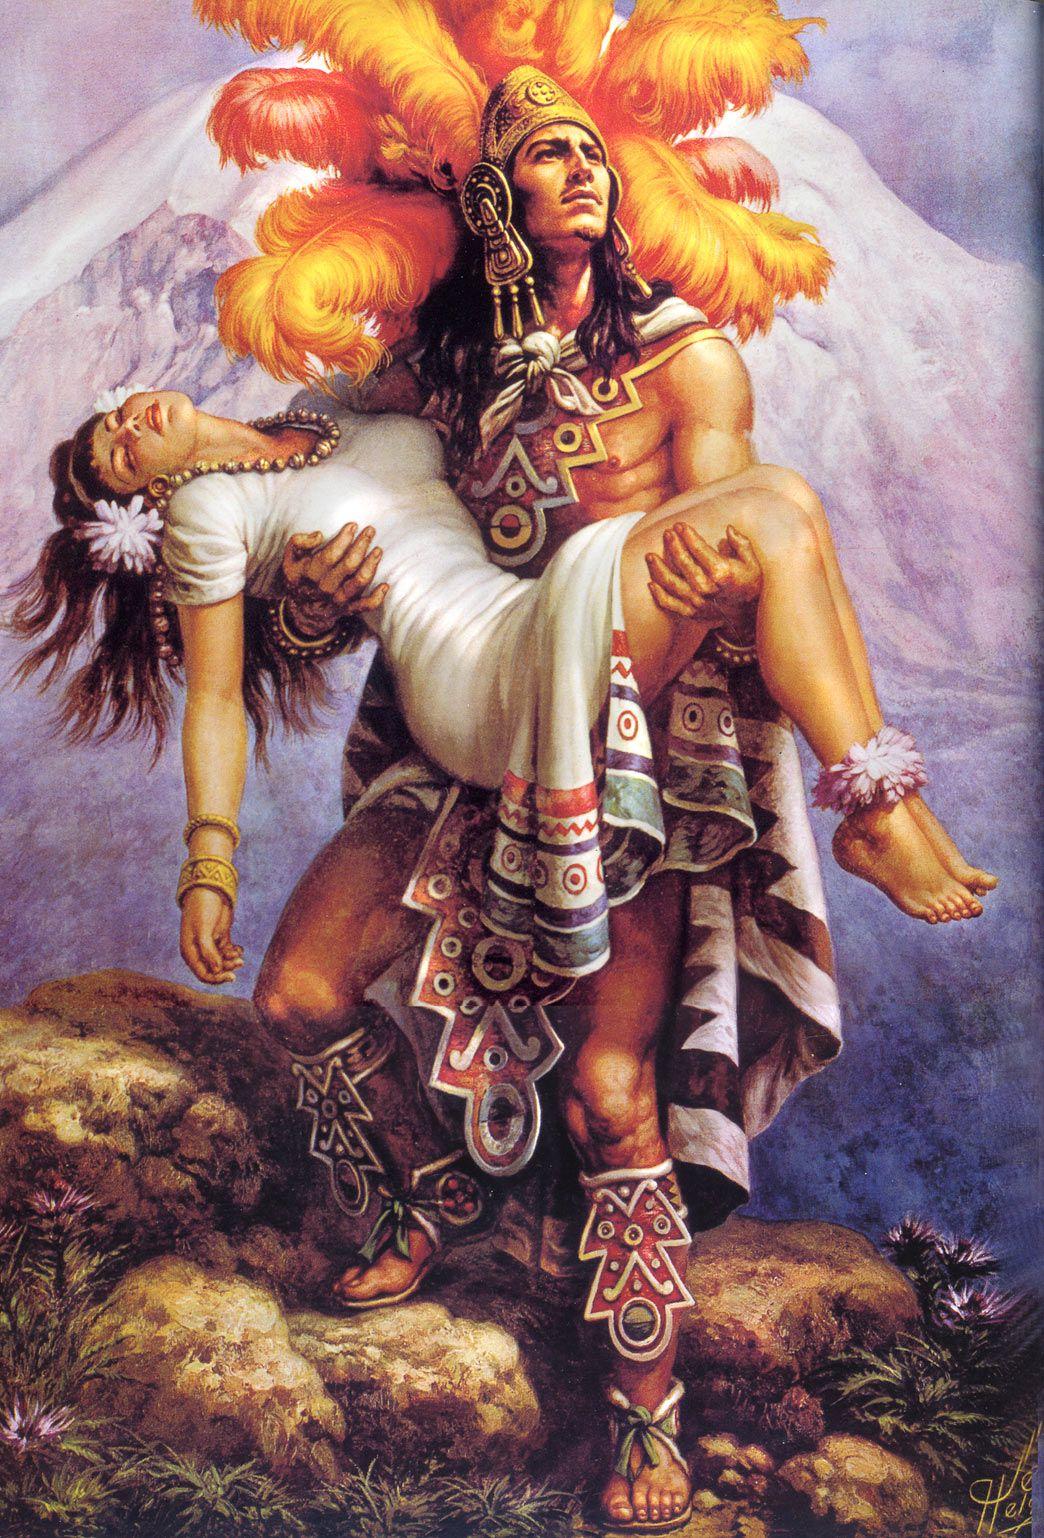 Painting of an Aztec man standing in front of a mountain, holding a woman in his arms